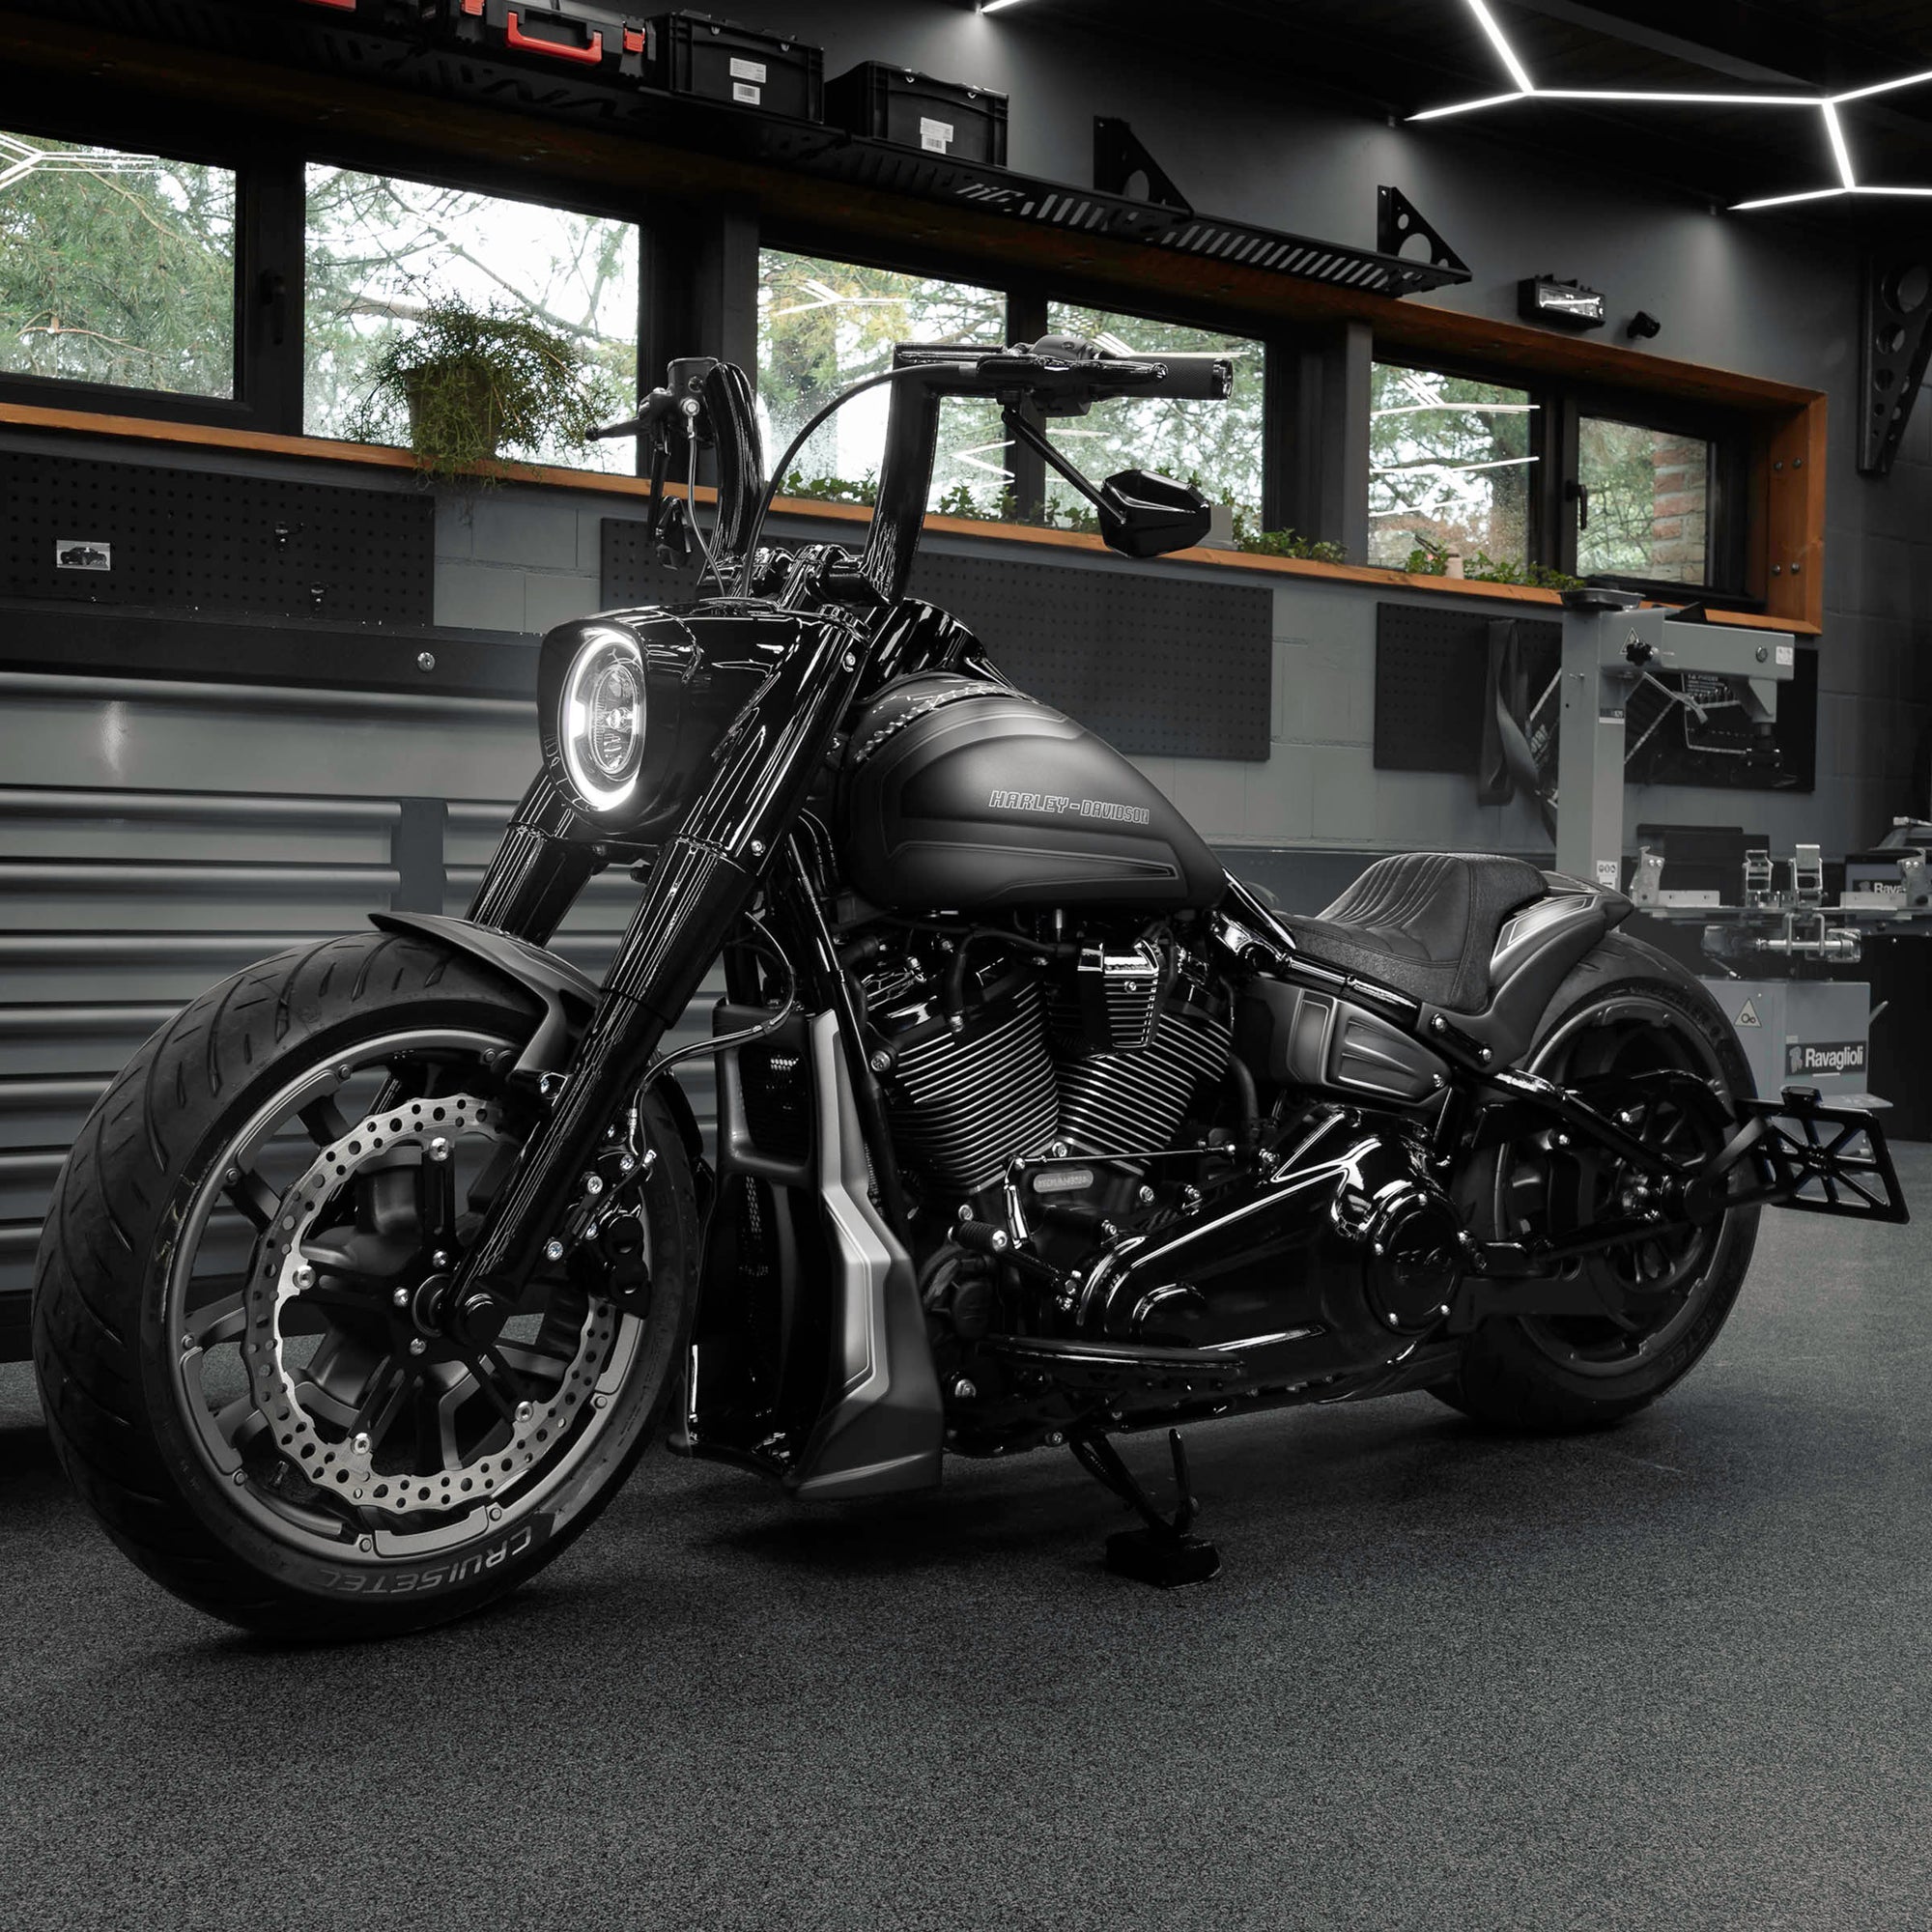 Modified Harley Davidson Fat Boy motorcycle with Killer Custom parts from the side in a modern bike shop with some windows in the background